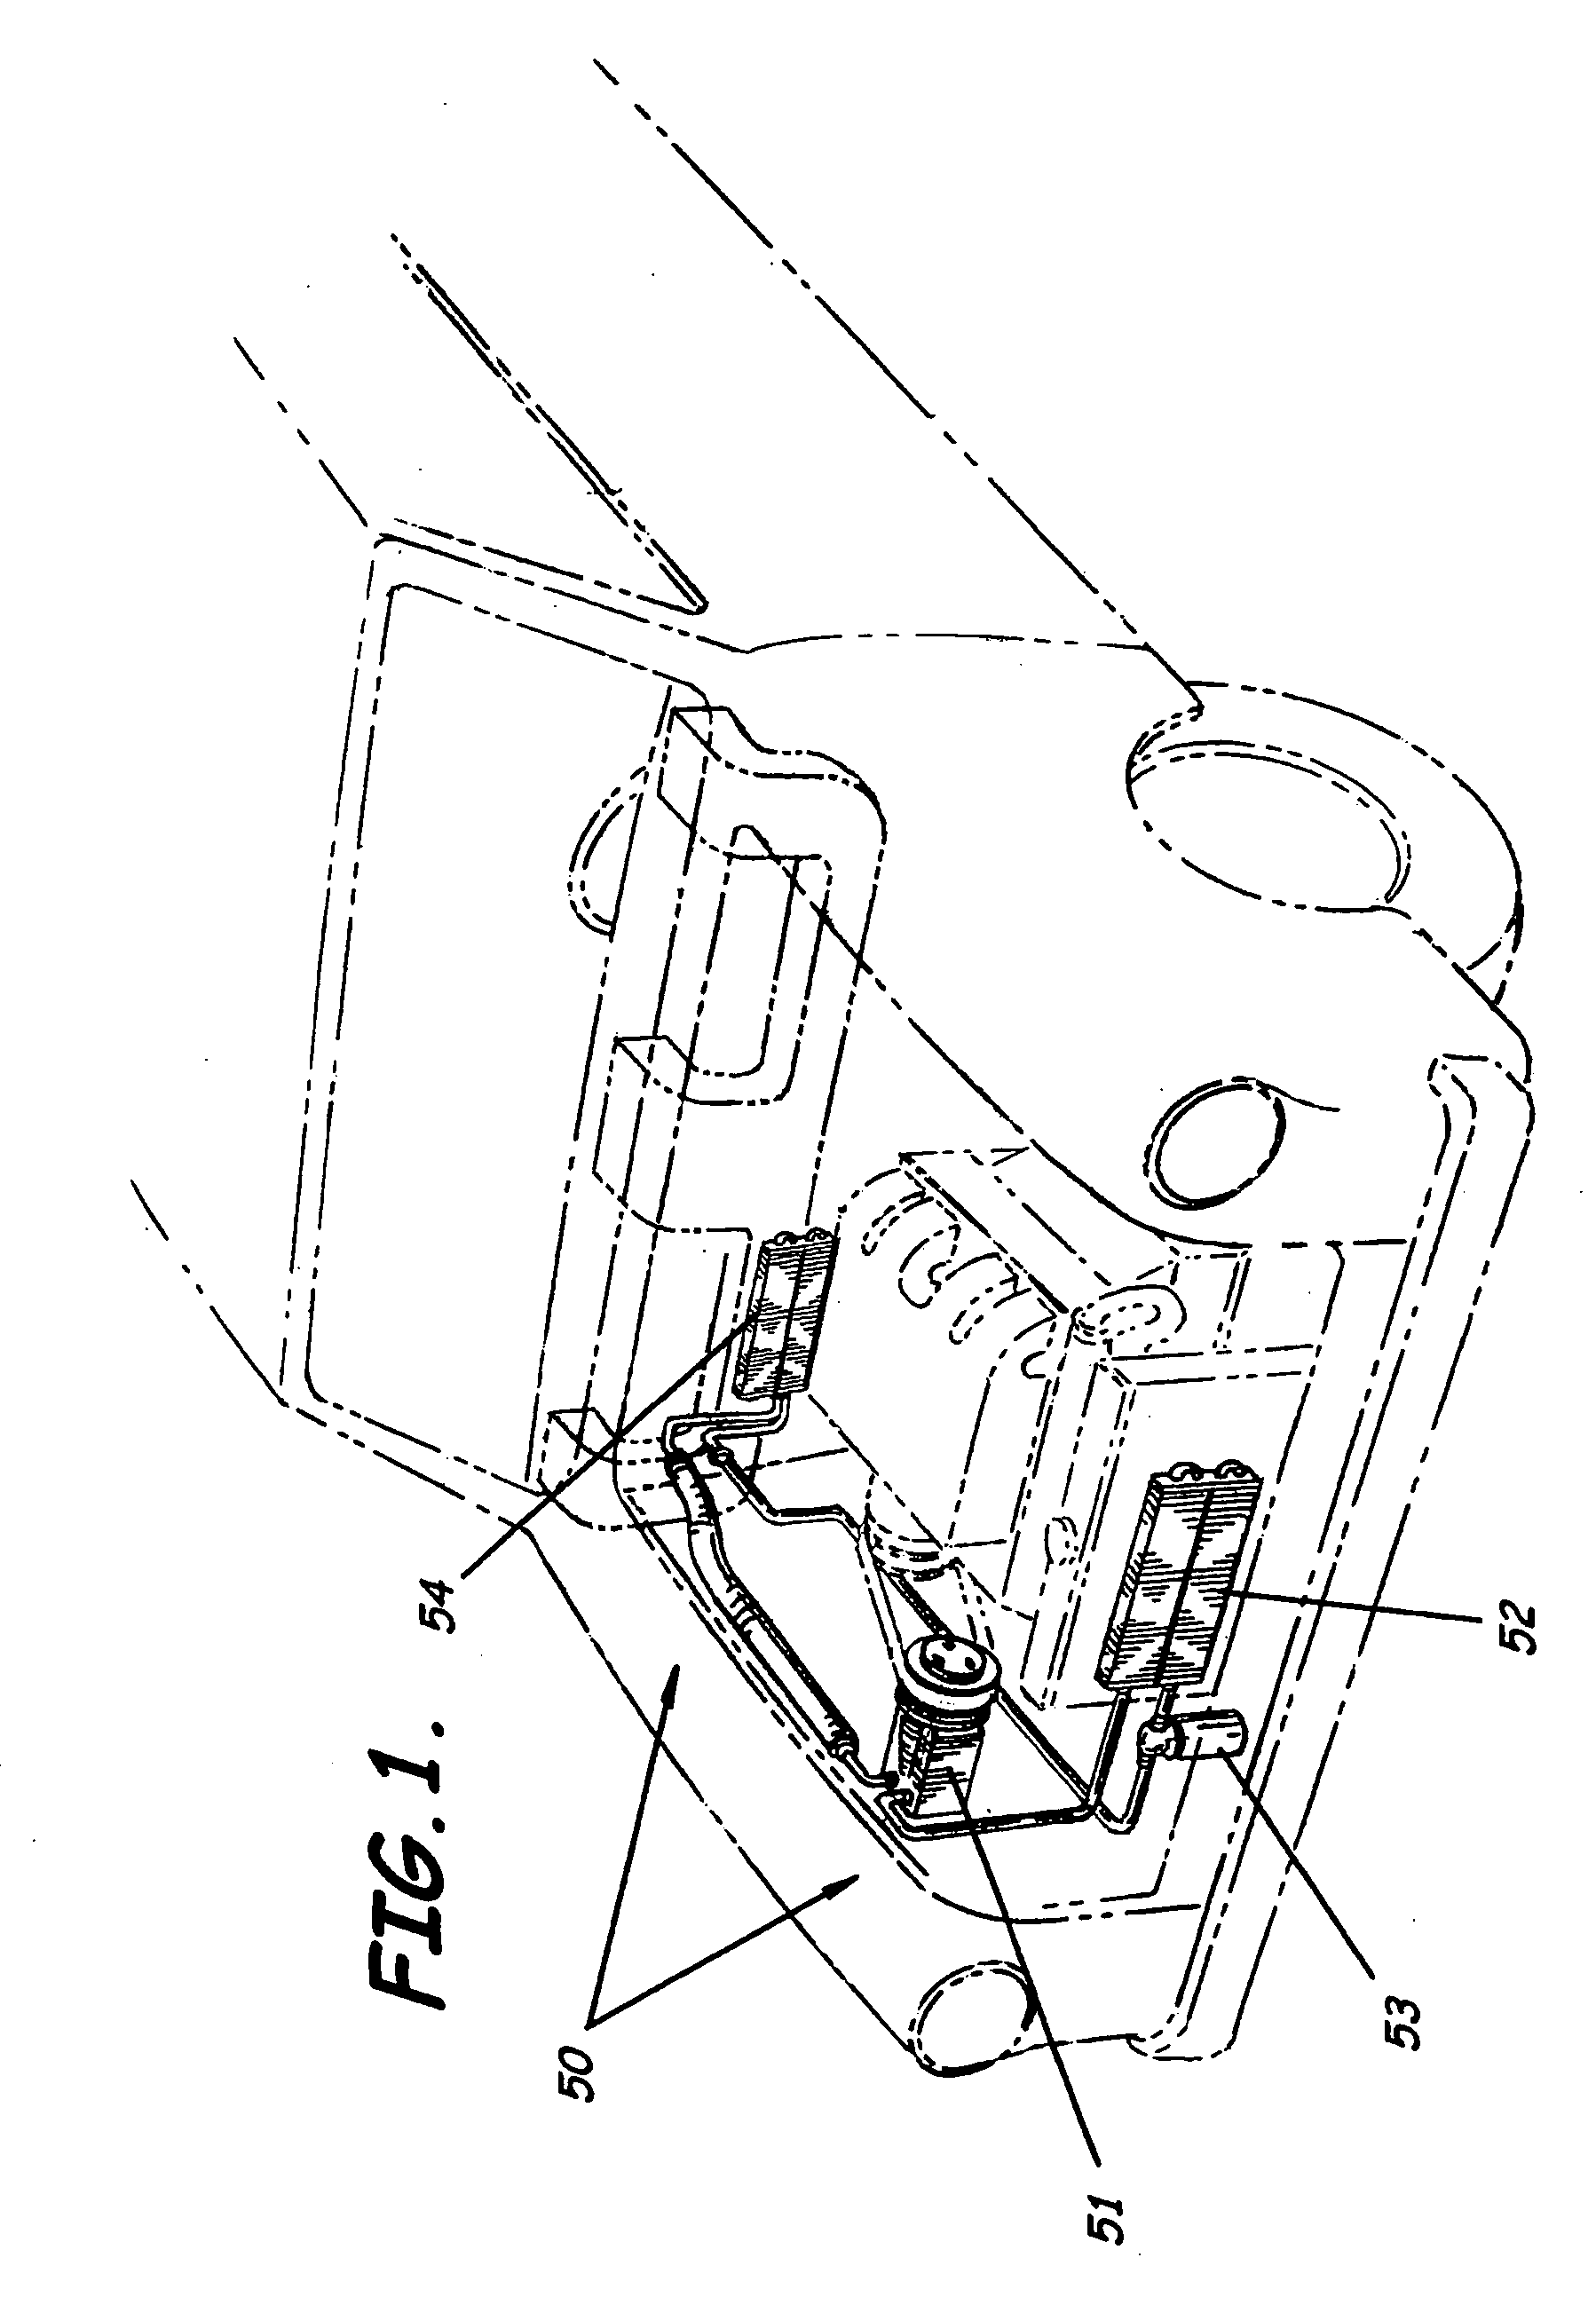 Method of forming a seal kit